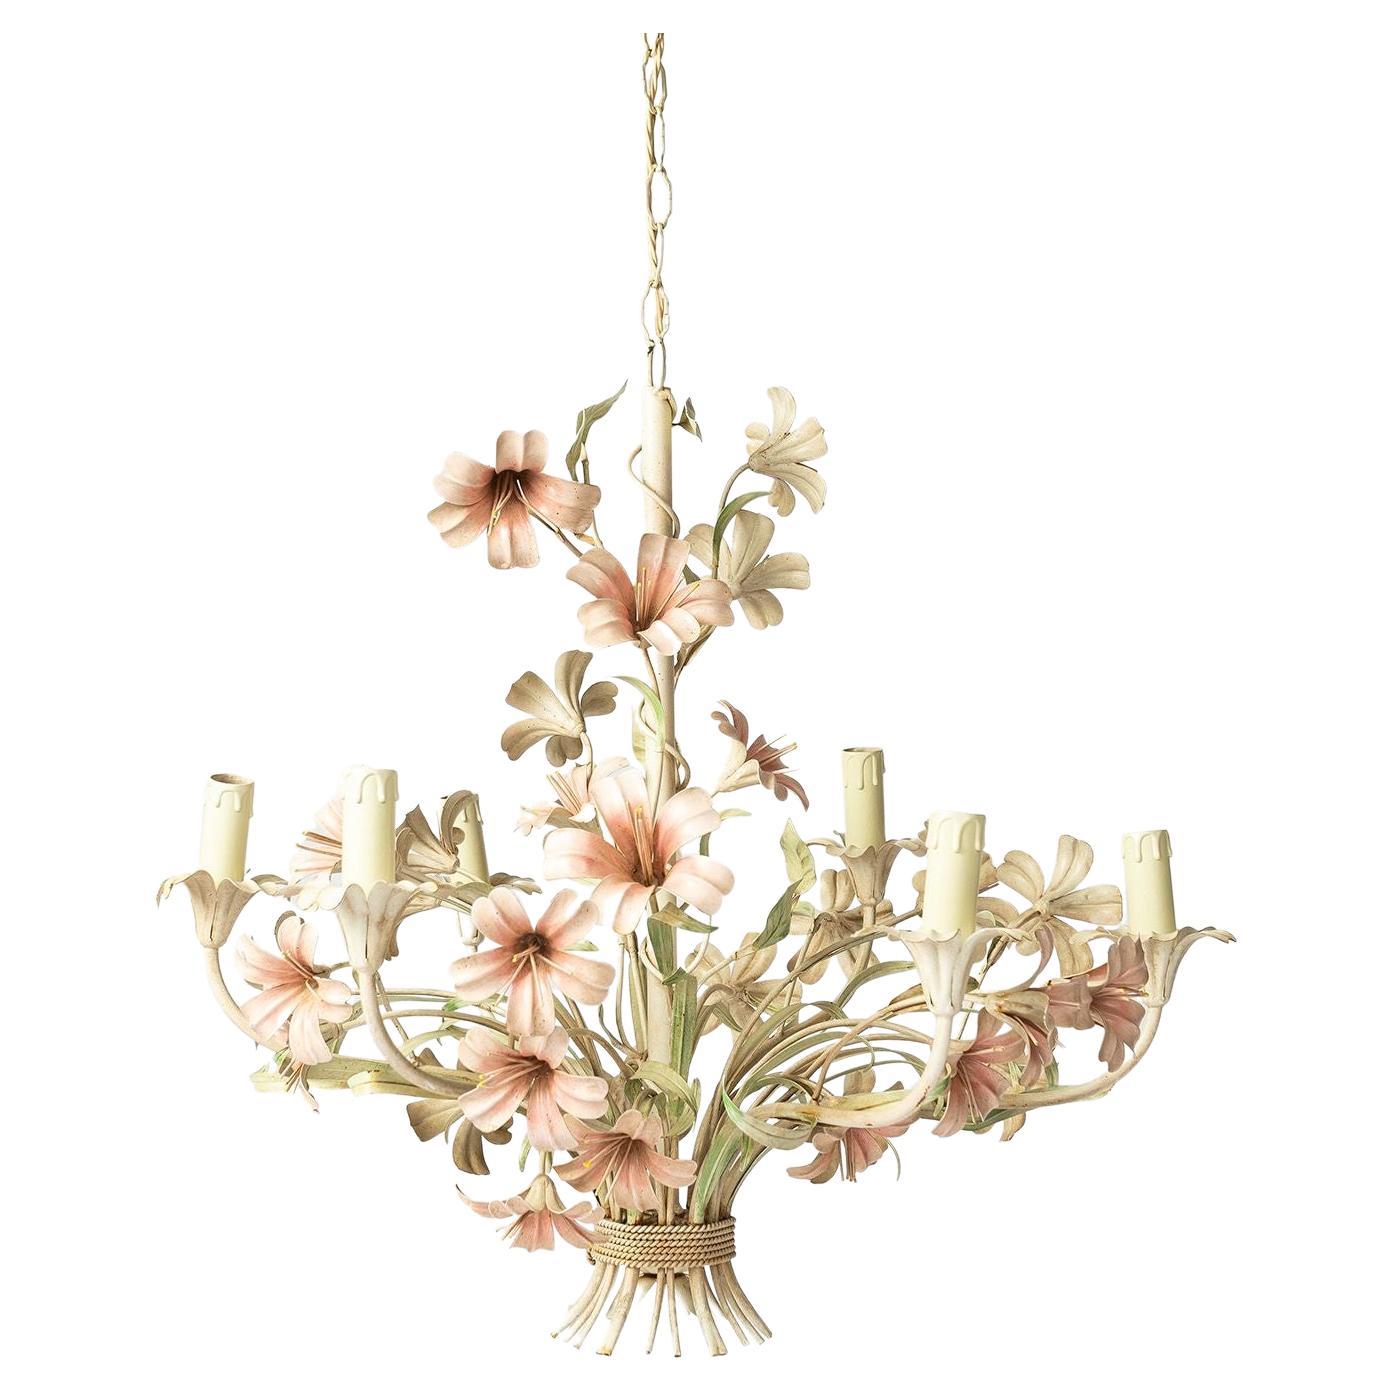 Large Floral Toleware Chandelier with Hibiscus Flowers